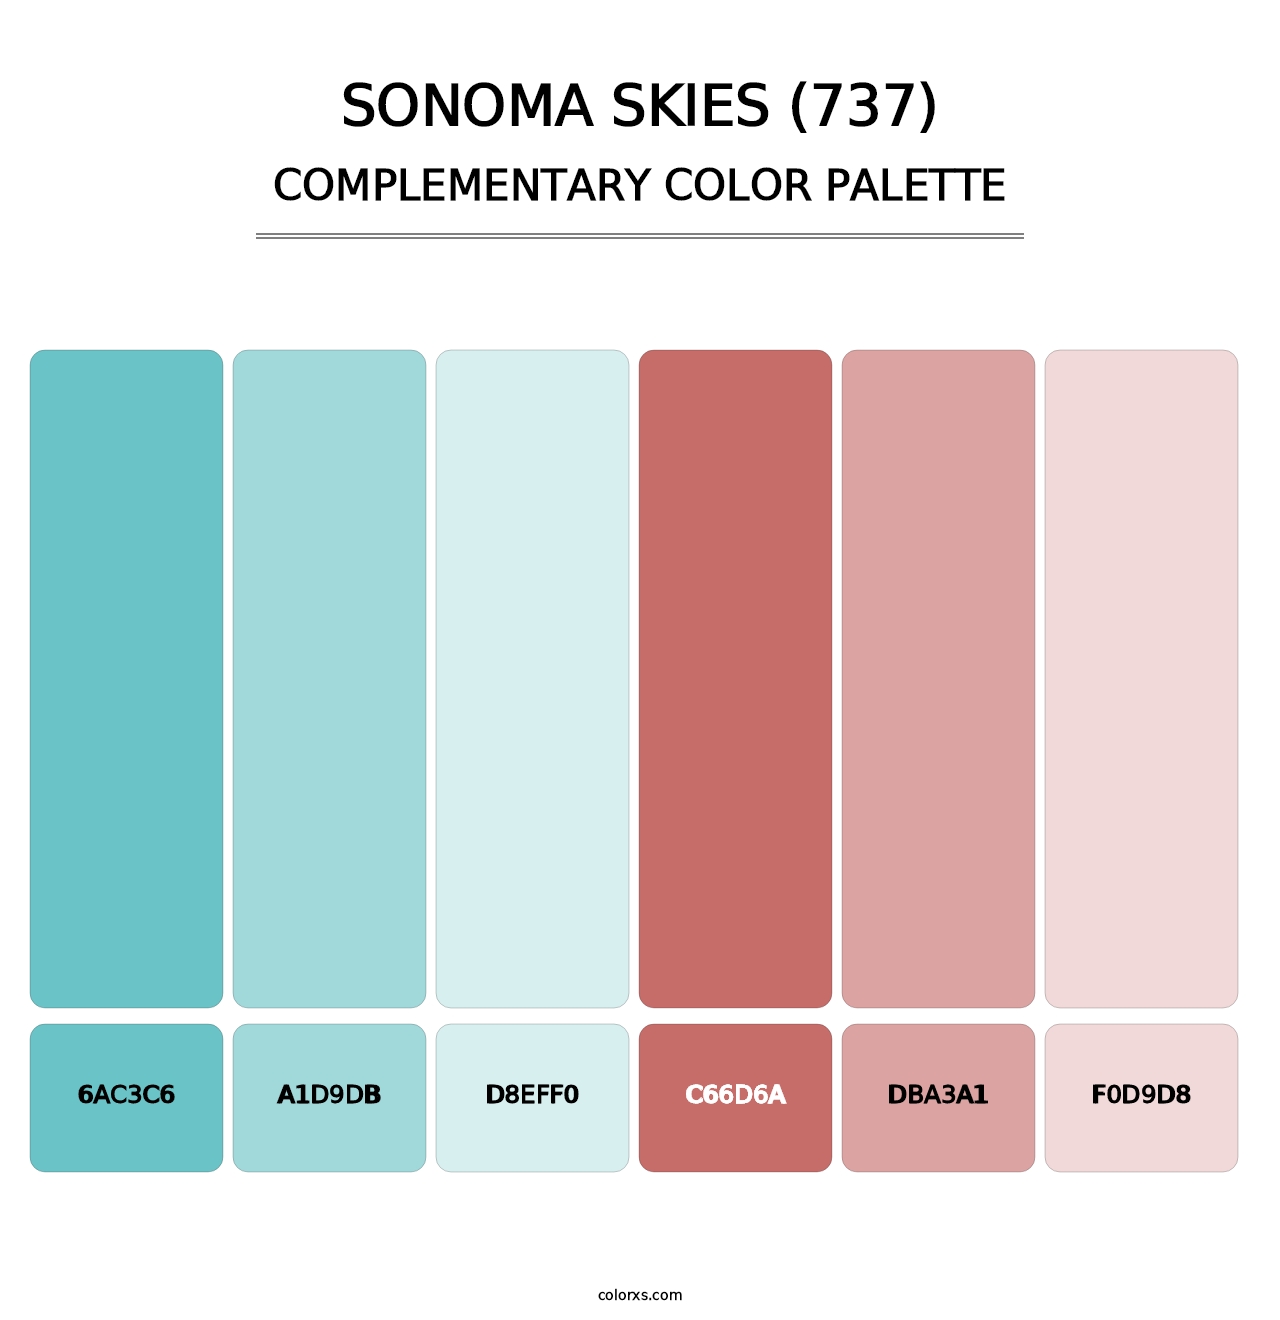 Sonoma Skies (737) - Complementary Color Palette